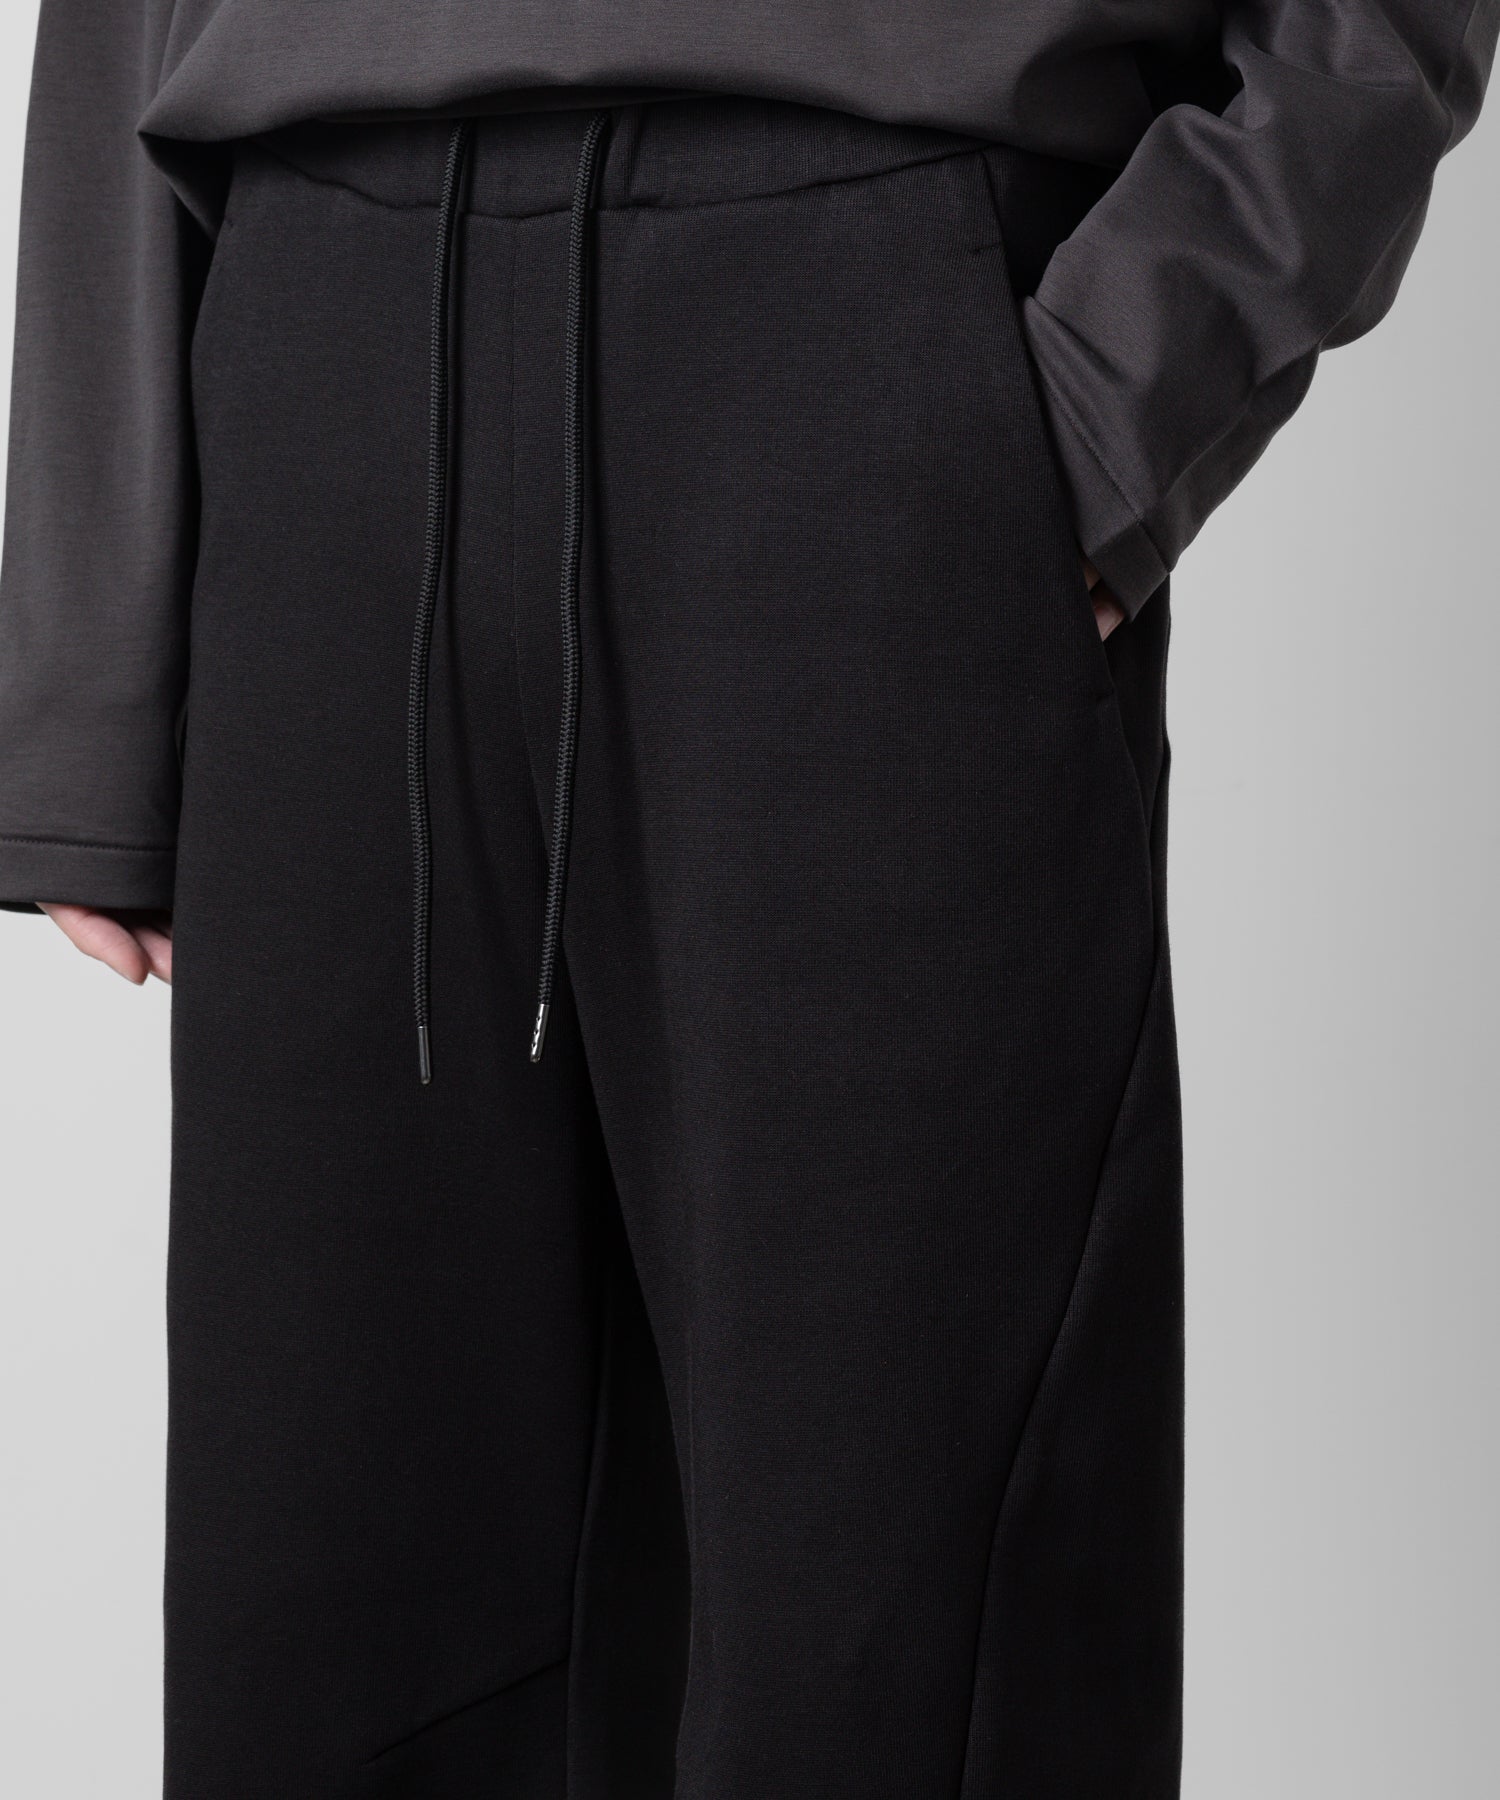 【ATTACHMENT】ATTACHMENT アタッチメントのCO/PE DOUBLE KNIT THREE DIMENSIONAL WIDE PANTS - BLACK 公式通販サイトsession福岡セレクトショップ